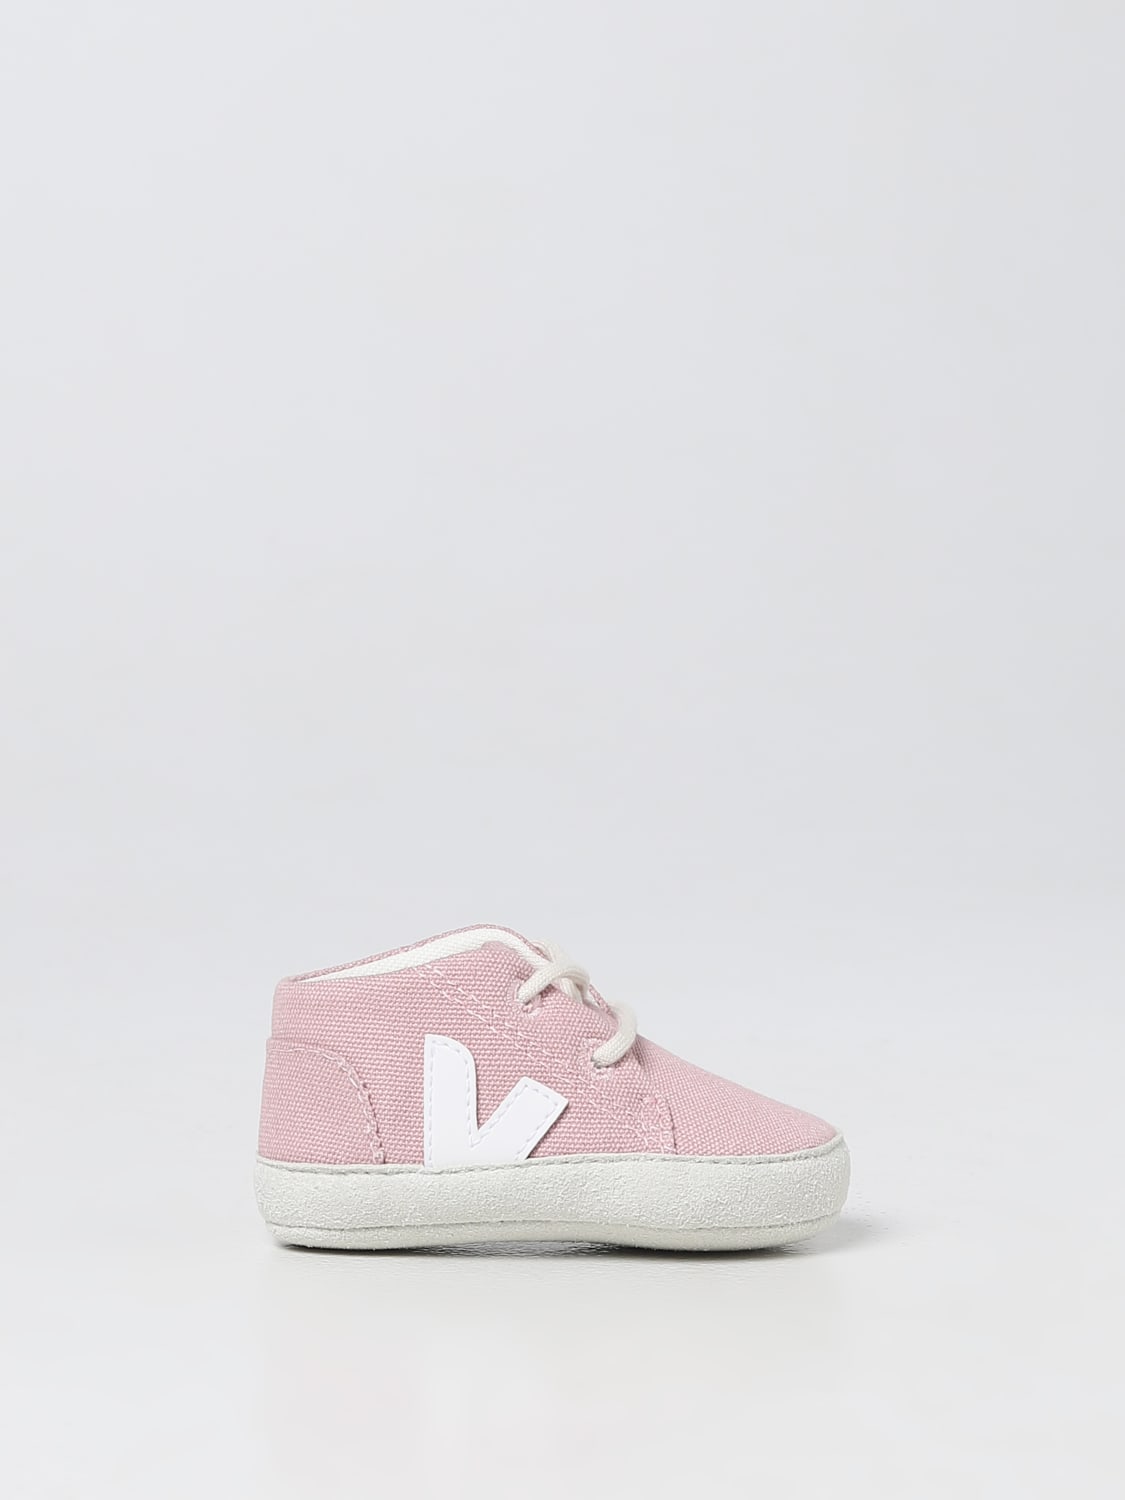 solo Adaptación retroceder VEJA: shoes for baby - White | Veja shoes BB0103277C online on GIGLIO.COM